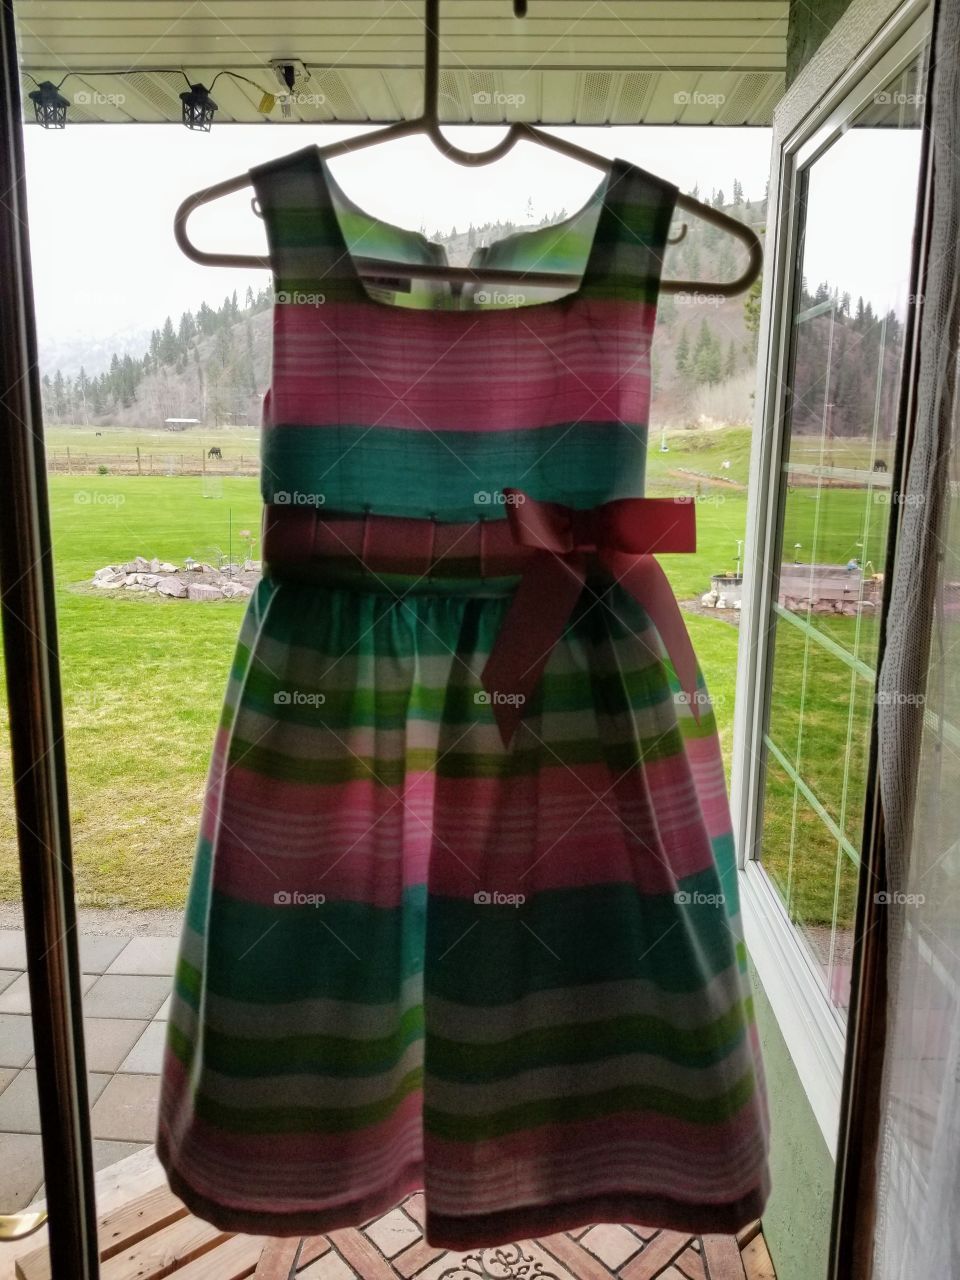 spring Easter dress hangs ready for little girl to wake up. green grass means spring is here